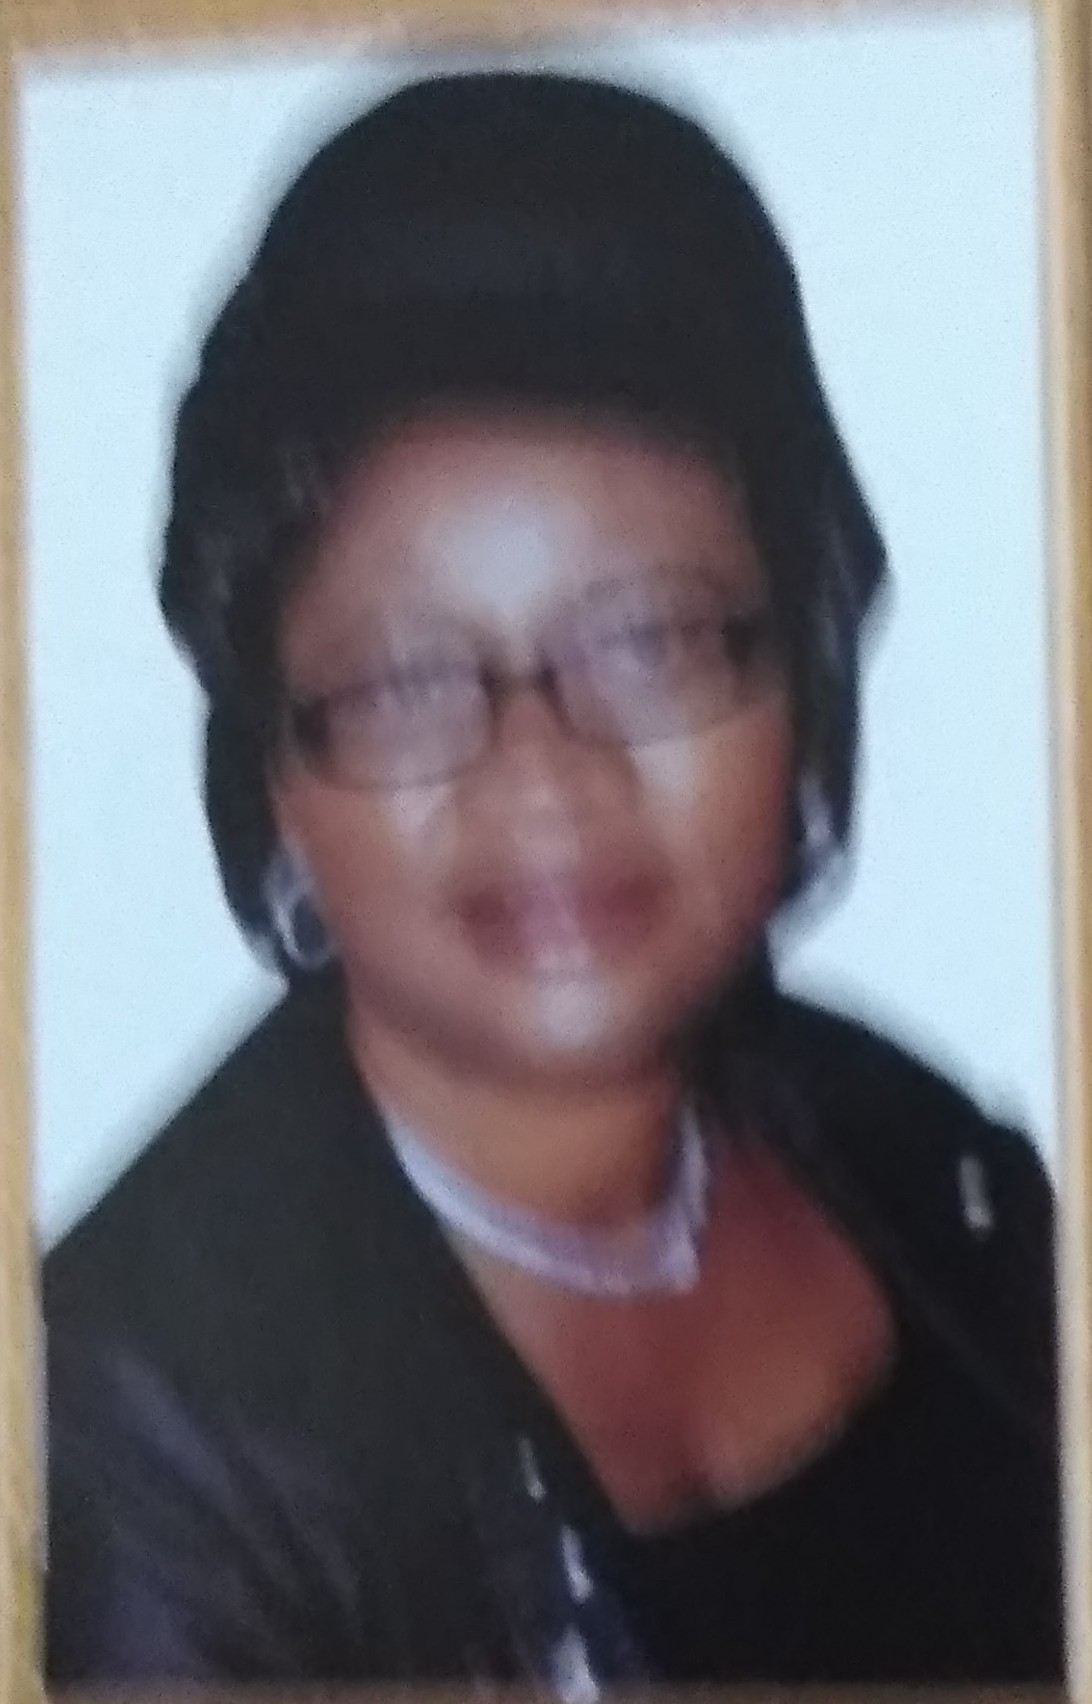 Justice Rosemary Onome Dugbo-Oghoghorie 